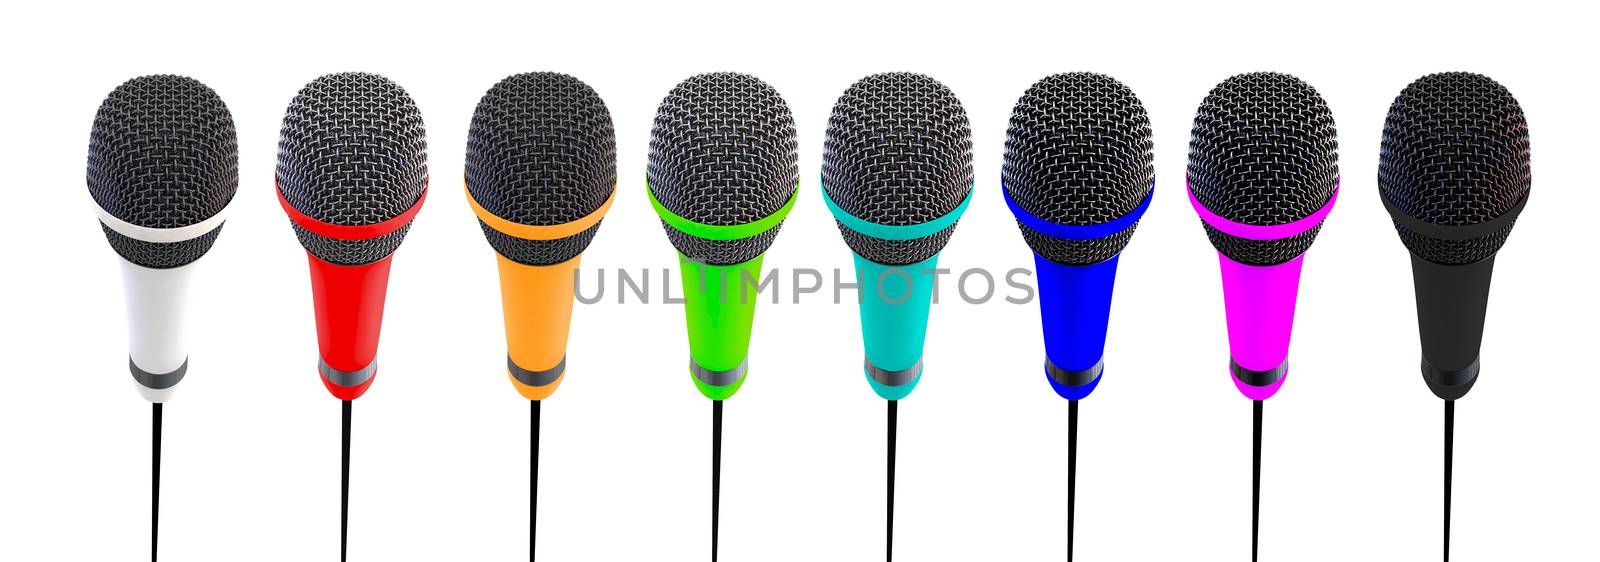 Several microphones aligned and colored. Microphones stand up.